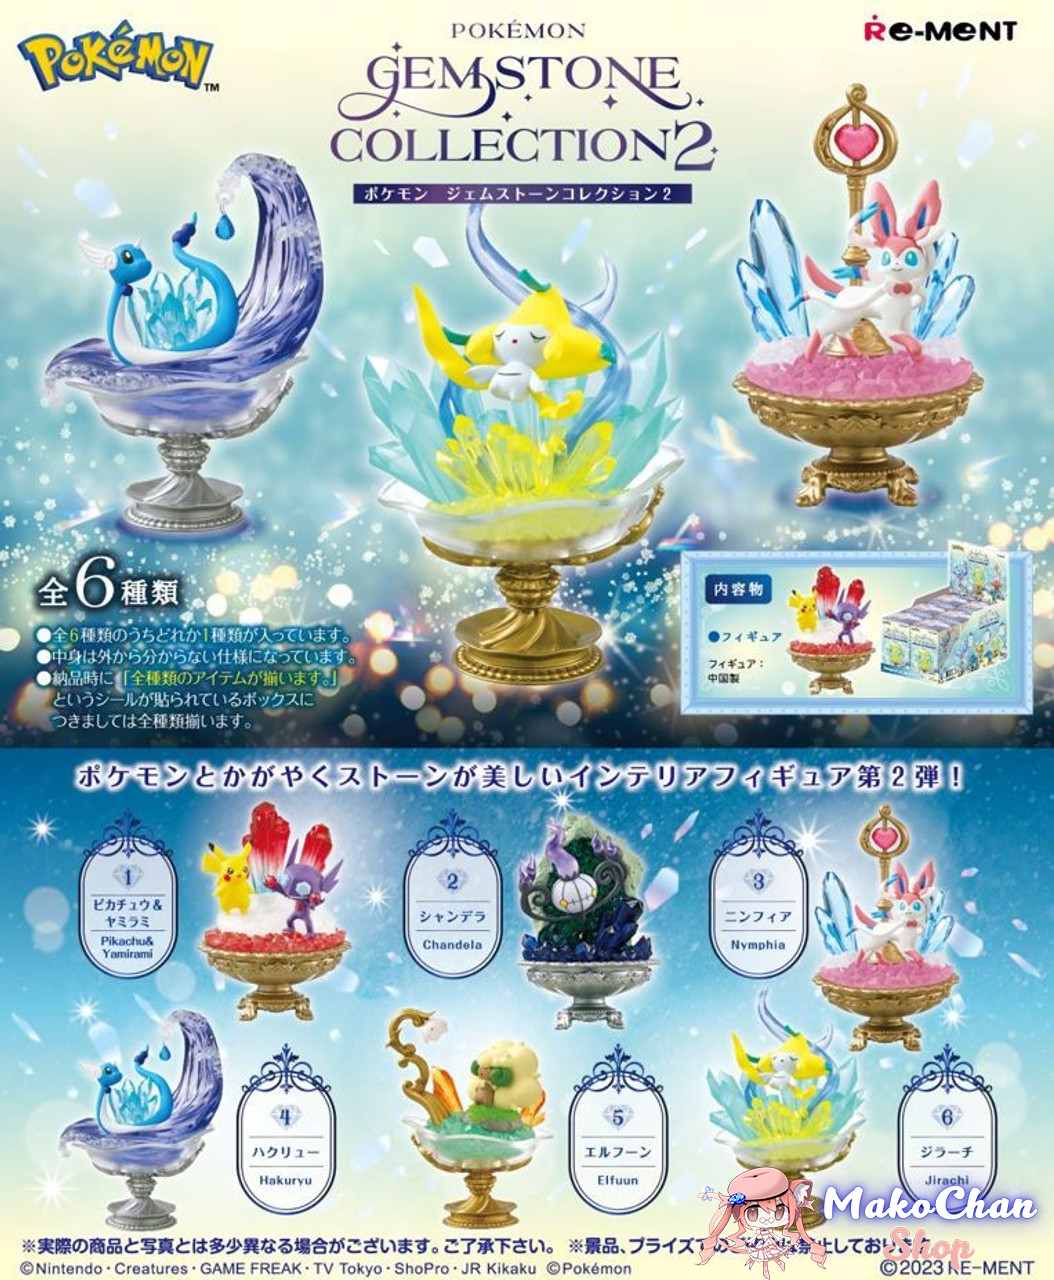 Re-ment: Gemstone Collection 2 (pre-order)